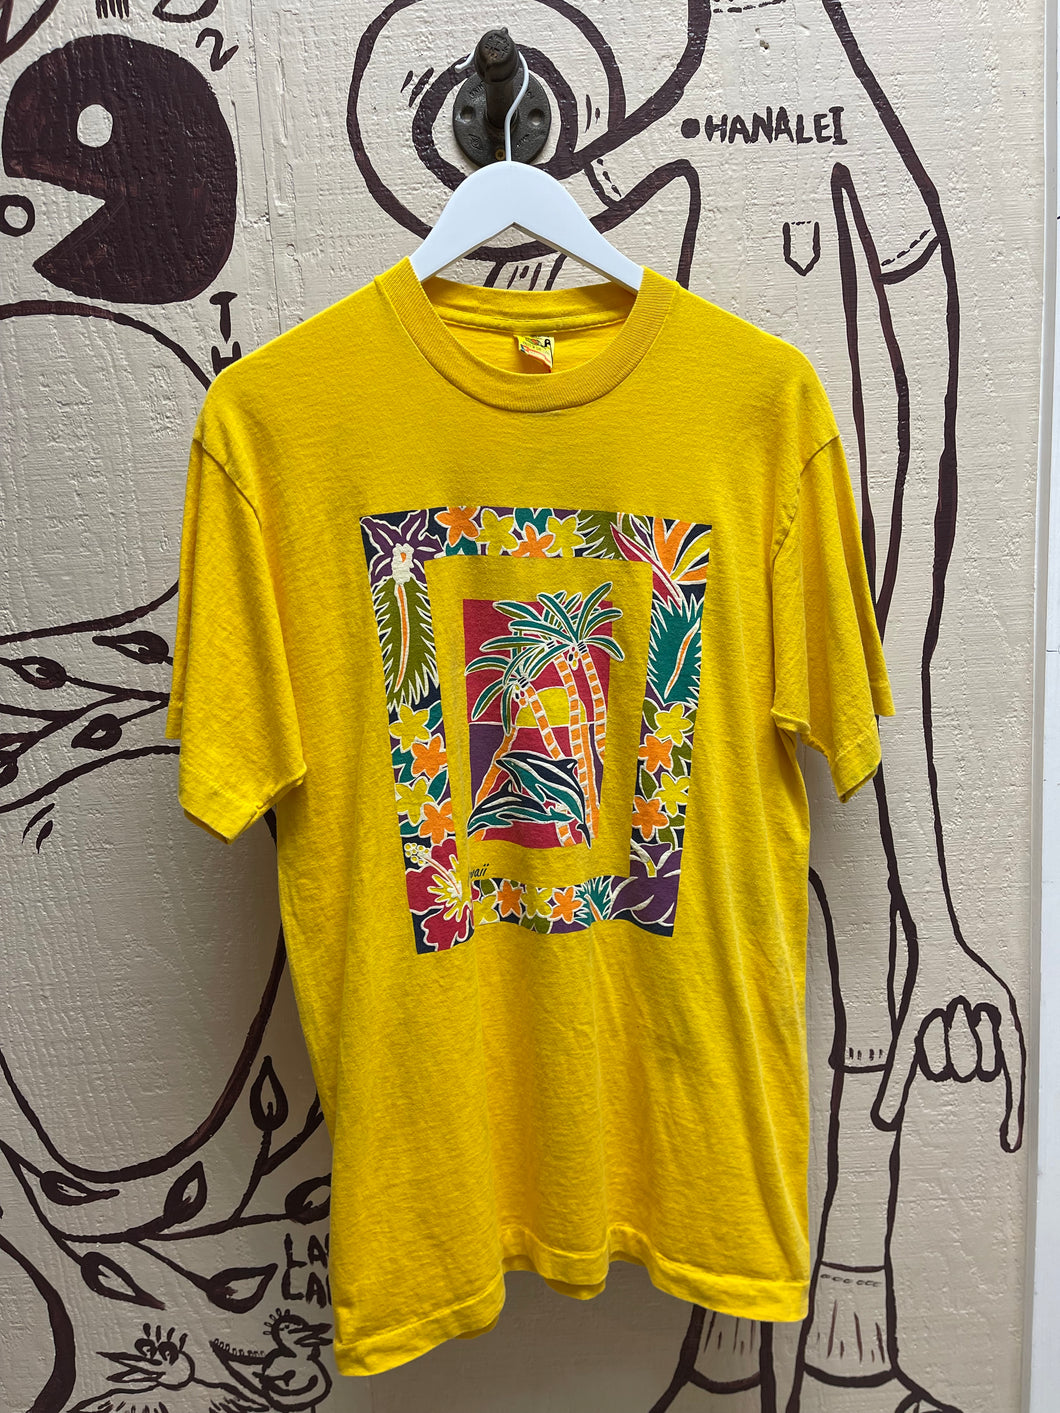 Ohanalei Vintage - “Floral Framed Dolphin” Hawaii Yellow Tee